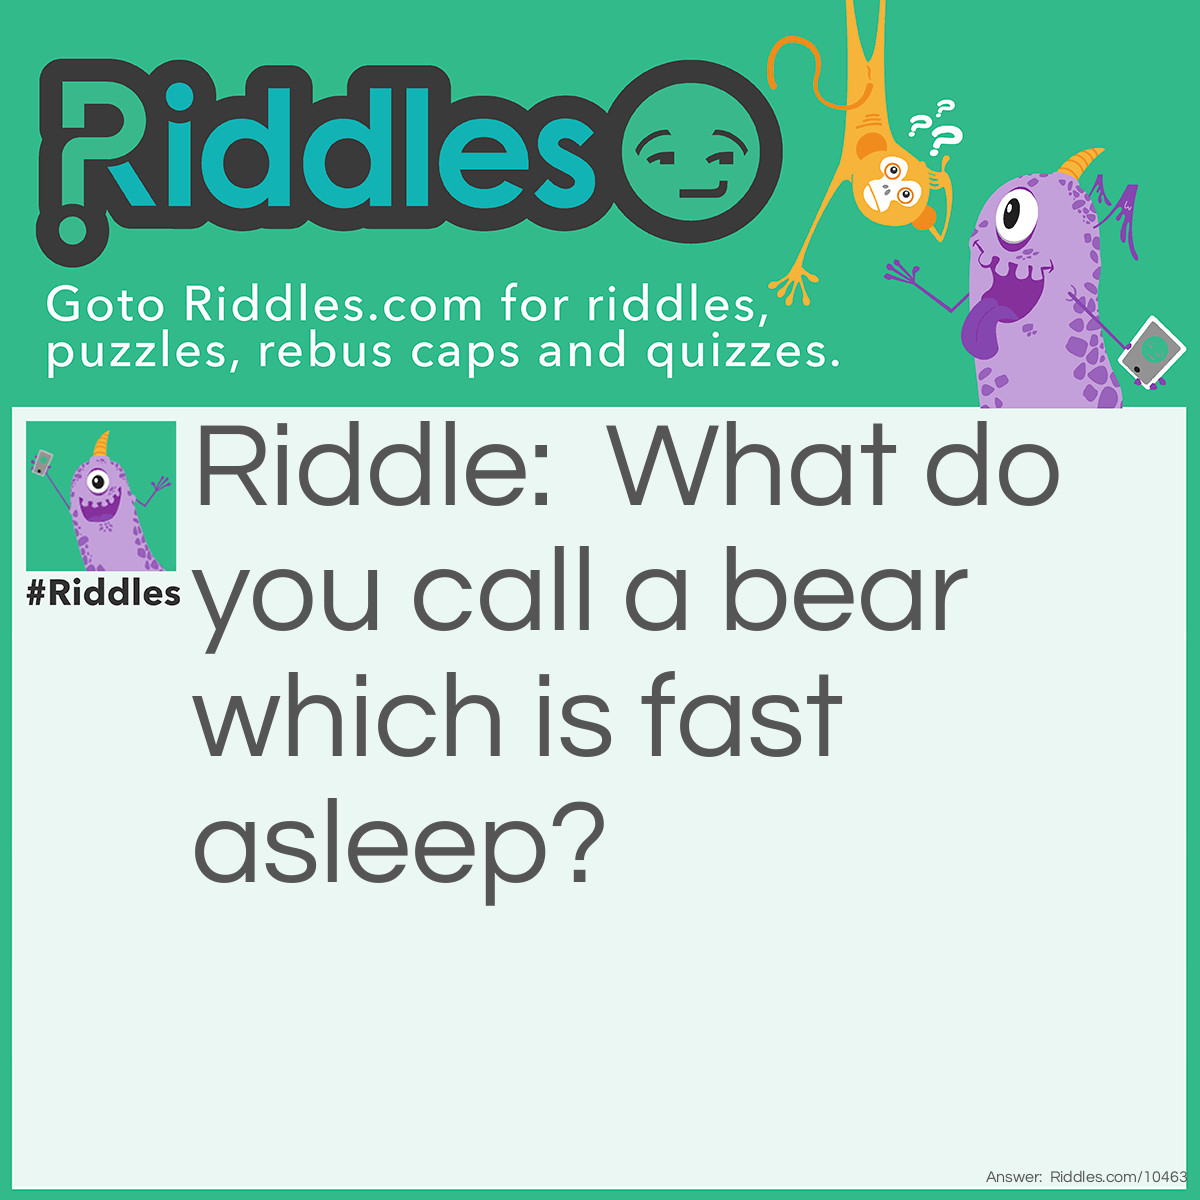 Riddle: What do you call a bear which is fast asleep? Answer: Bearly awake!